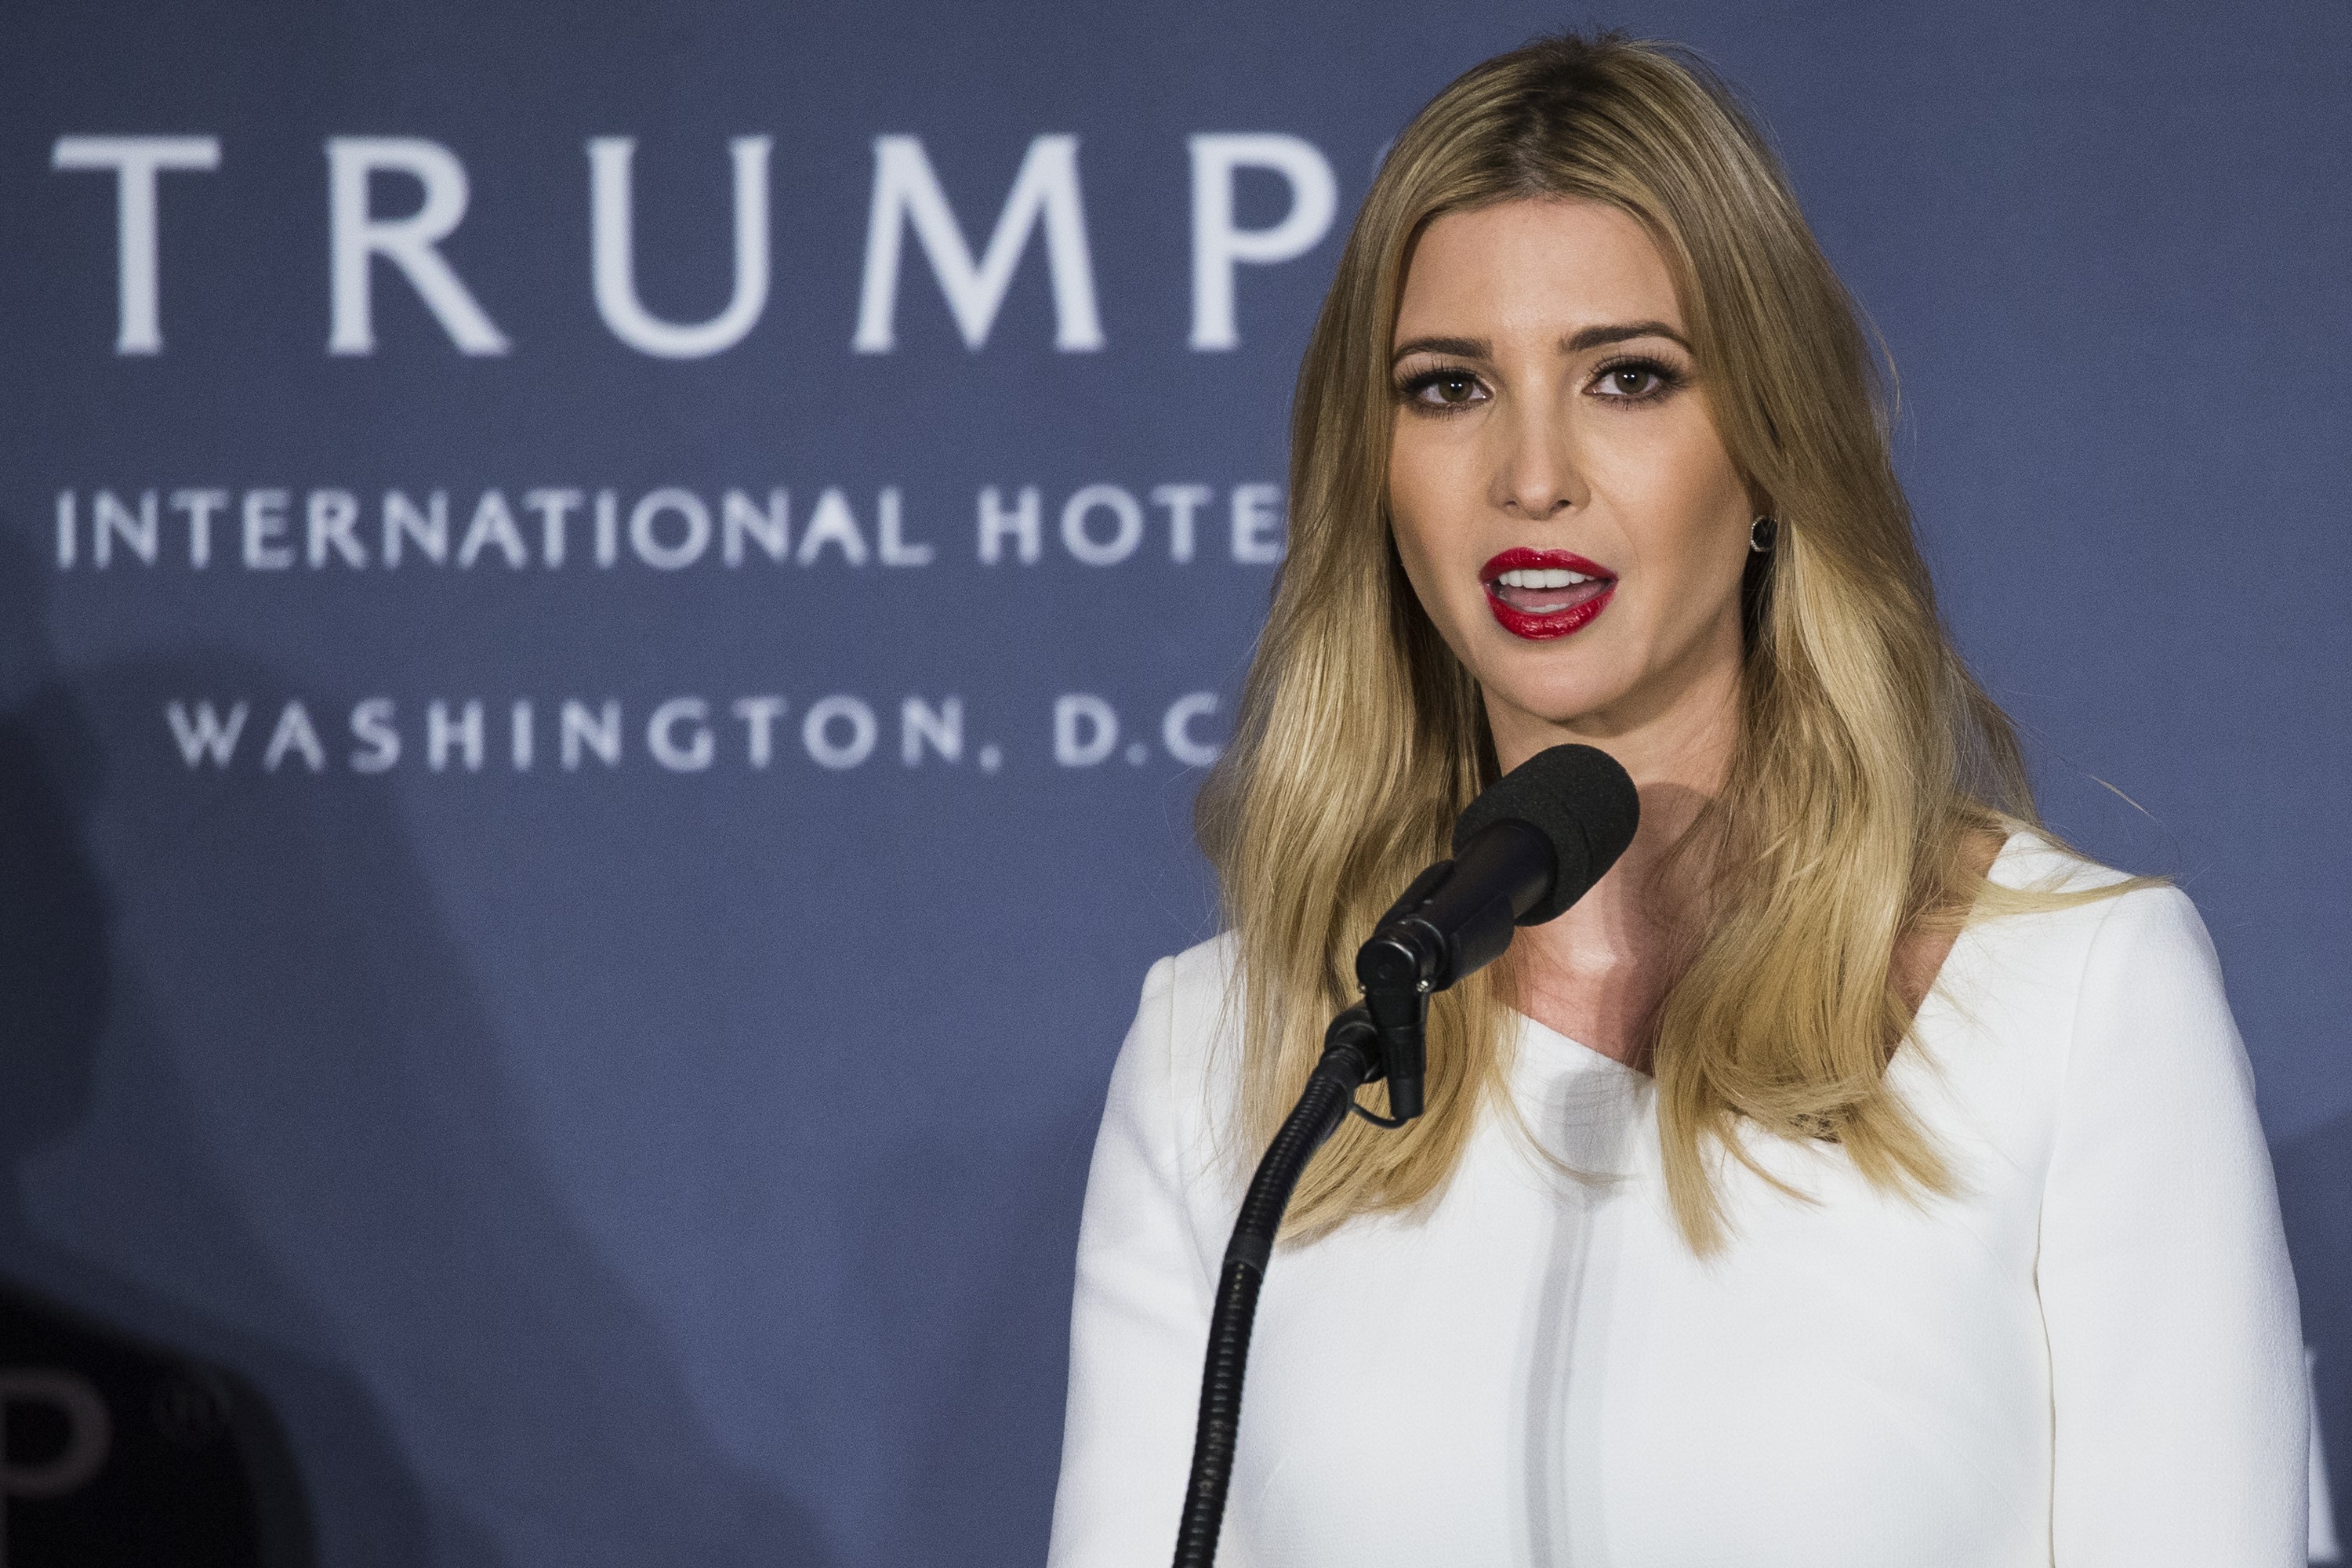 Ivanka Trump speaks as her father, Republican Presidential Candidate Donald Trump, stands with her on stage during the opening ceremony for the Trump International Hotel, Old Post Office, in Washington, USA on October 26, 2016. (Photo by Samuel Corum/Anadolu Agency/Getty Images) (Anadolu Agency—Getty Images)